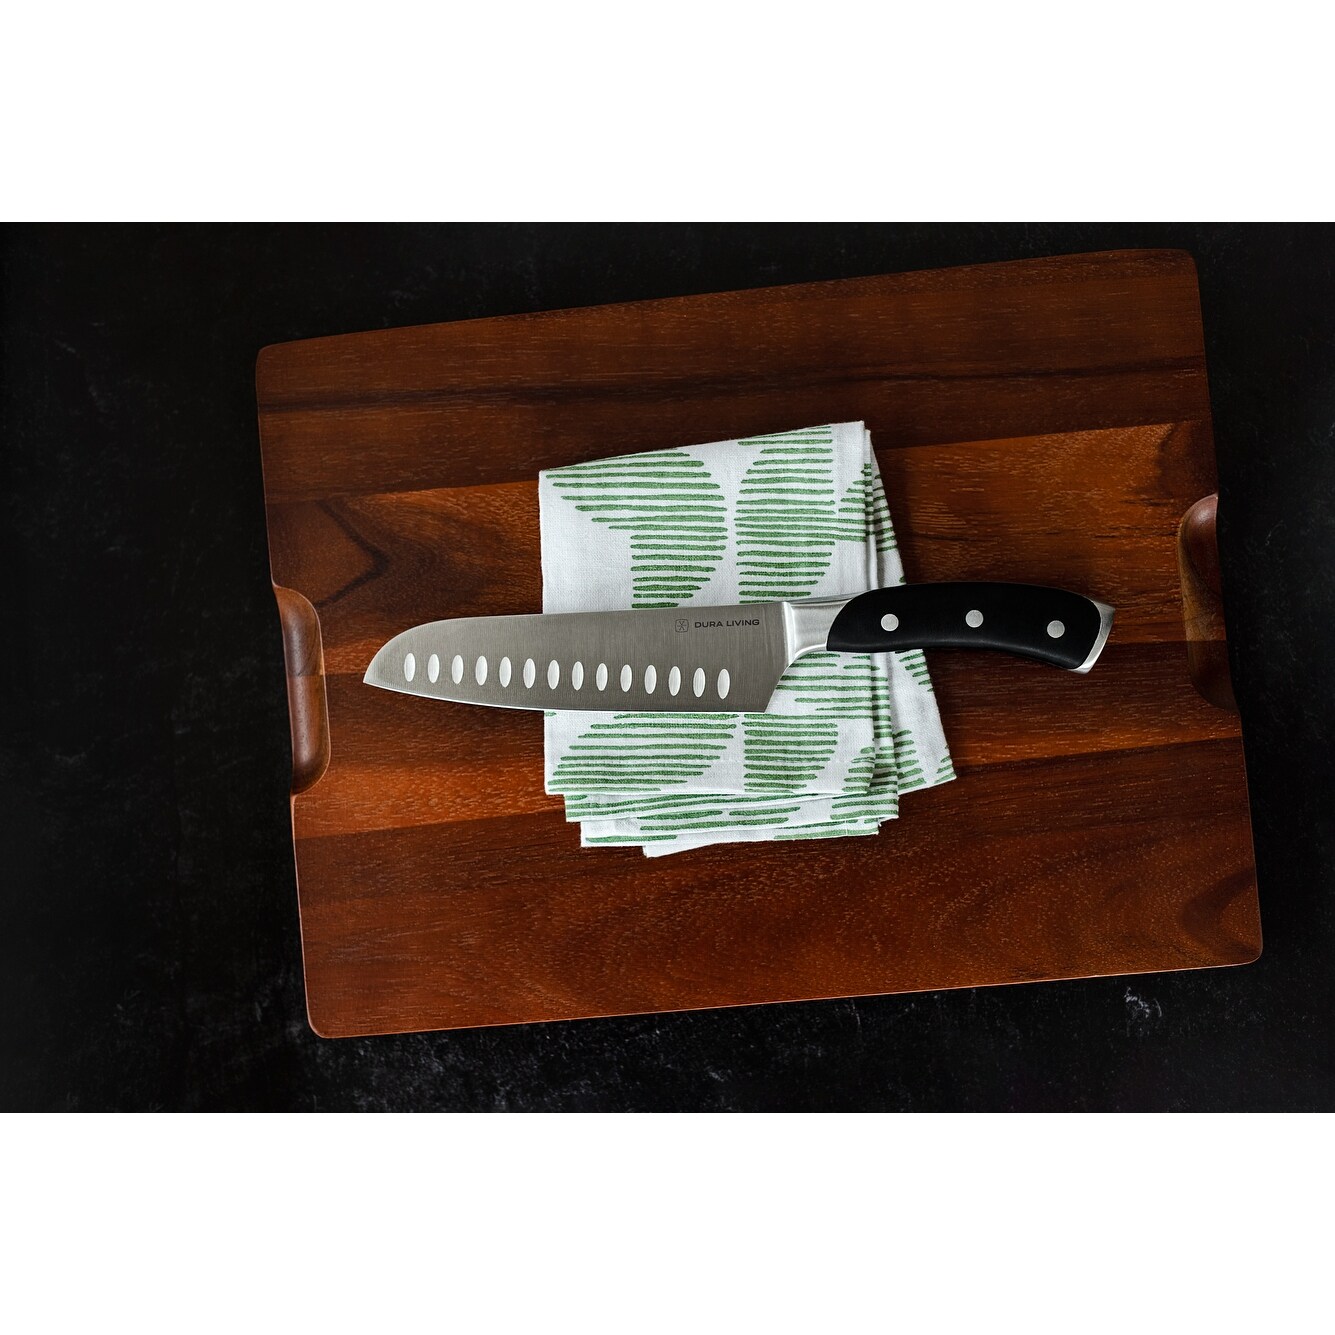 https://ak1.ostkcdn.com/images/products/is/images/direct/27555f5944fe6e743556c0489a8cba8f49366d49/Dura-Living-Elite-7-inch-Santoku-Knife---Forged-High-Carbon-German-Stainless-Steel-Blade%2C-Black.jpg